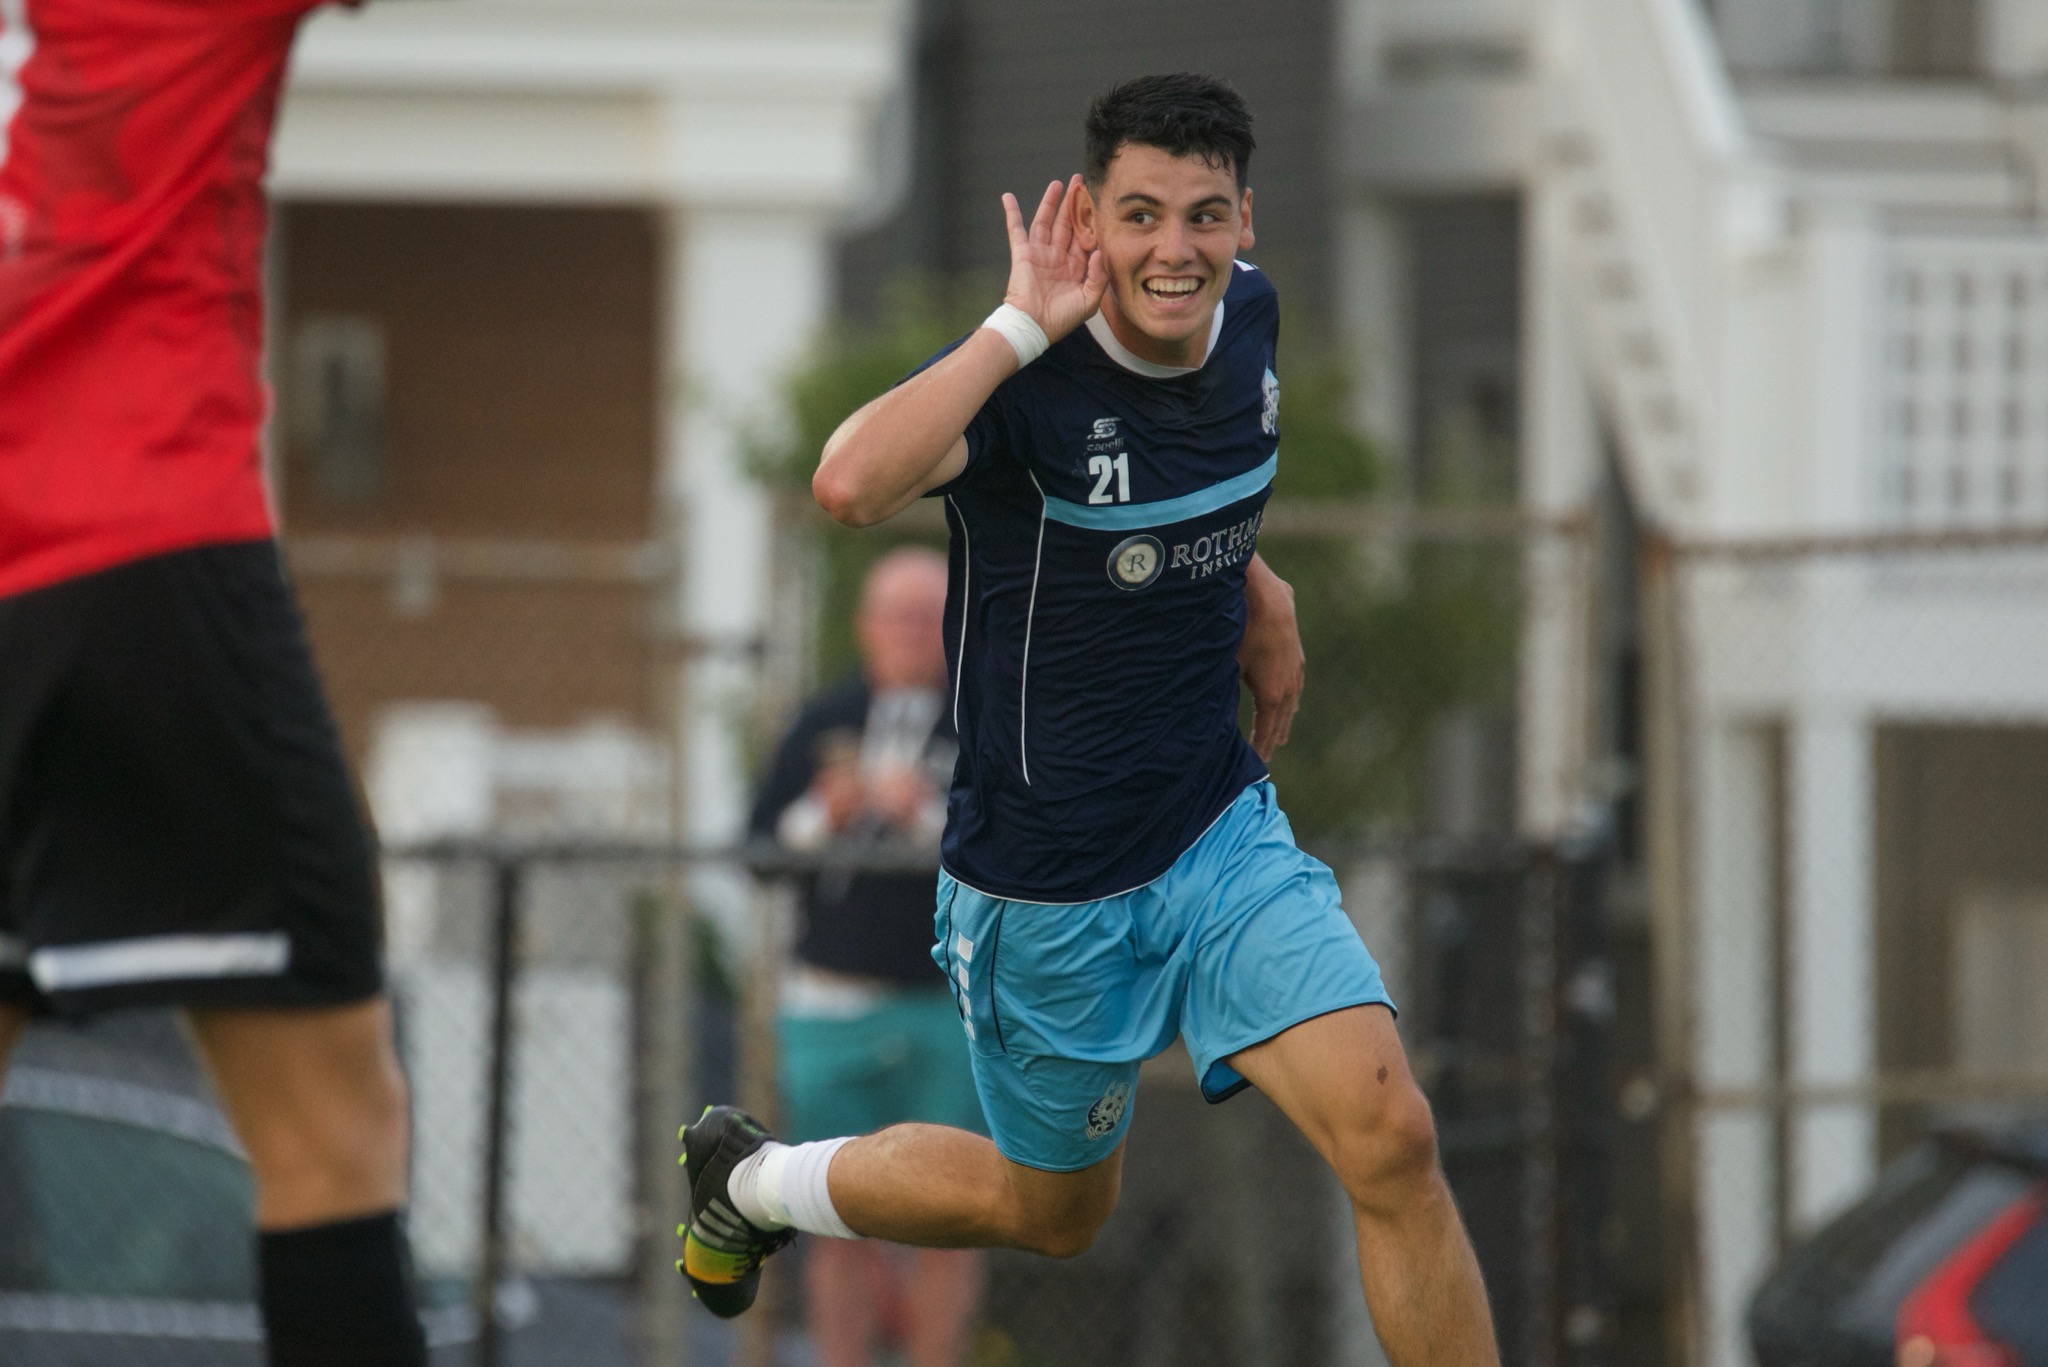 Nor'easters on verge of division title with 1-0 win vs. Real Central NJ